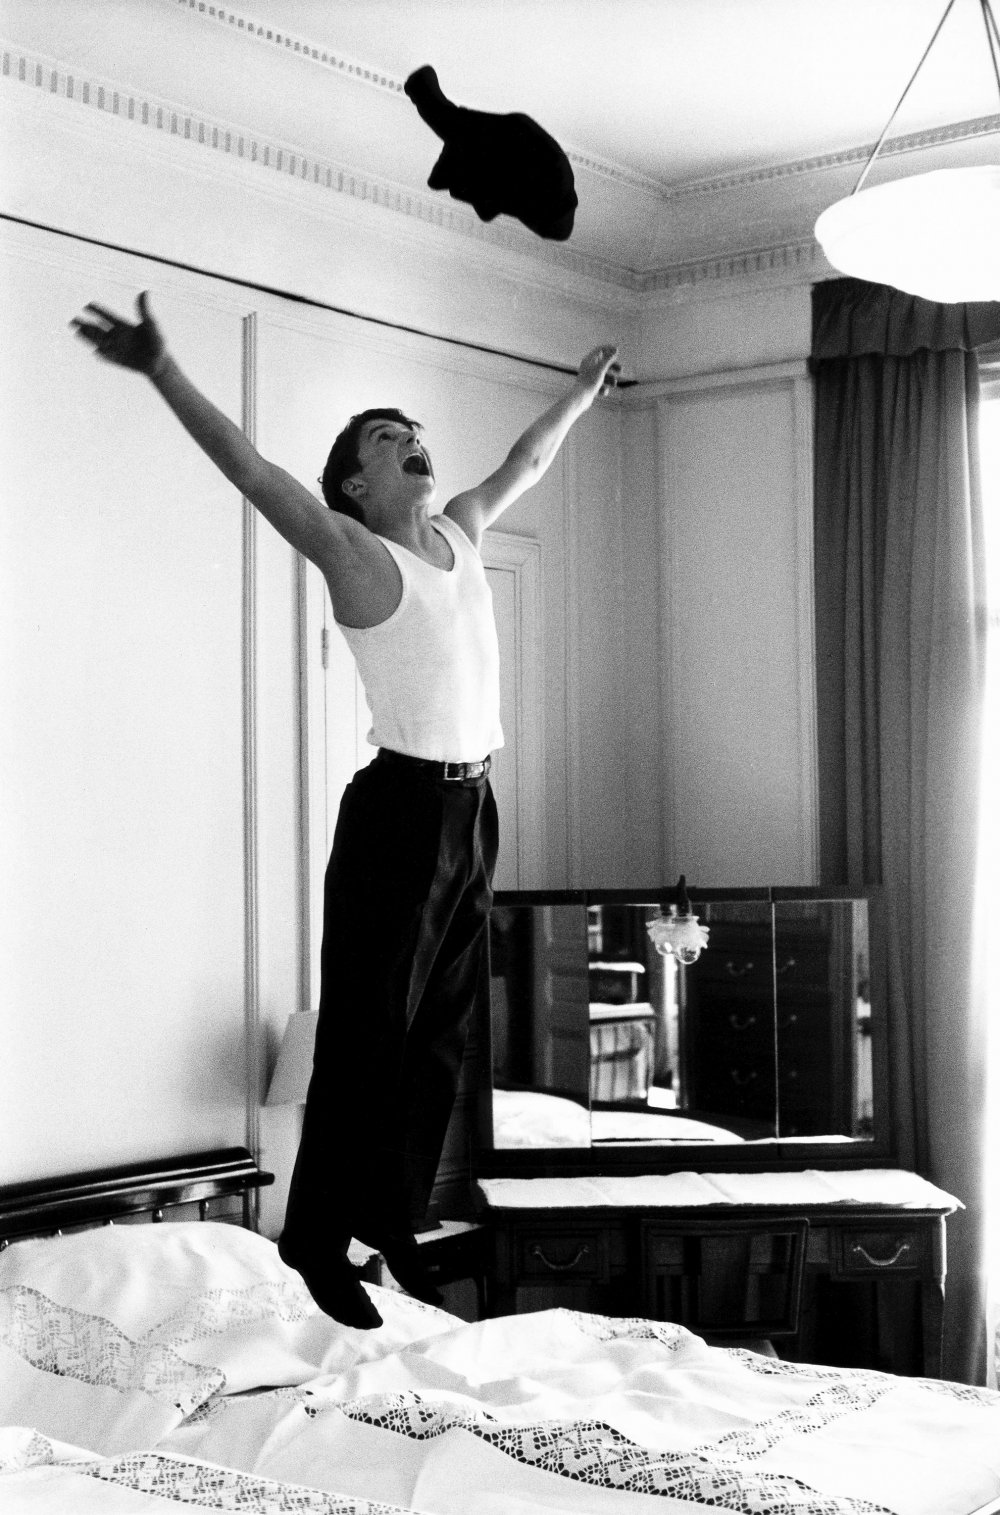 A 15-year-old Jean-Pierre Léaud jumps on his bed in his hotel room in 1959. The 400 Blows premiered at Cannes that year.